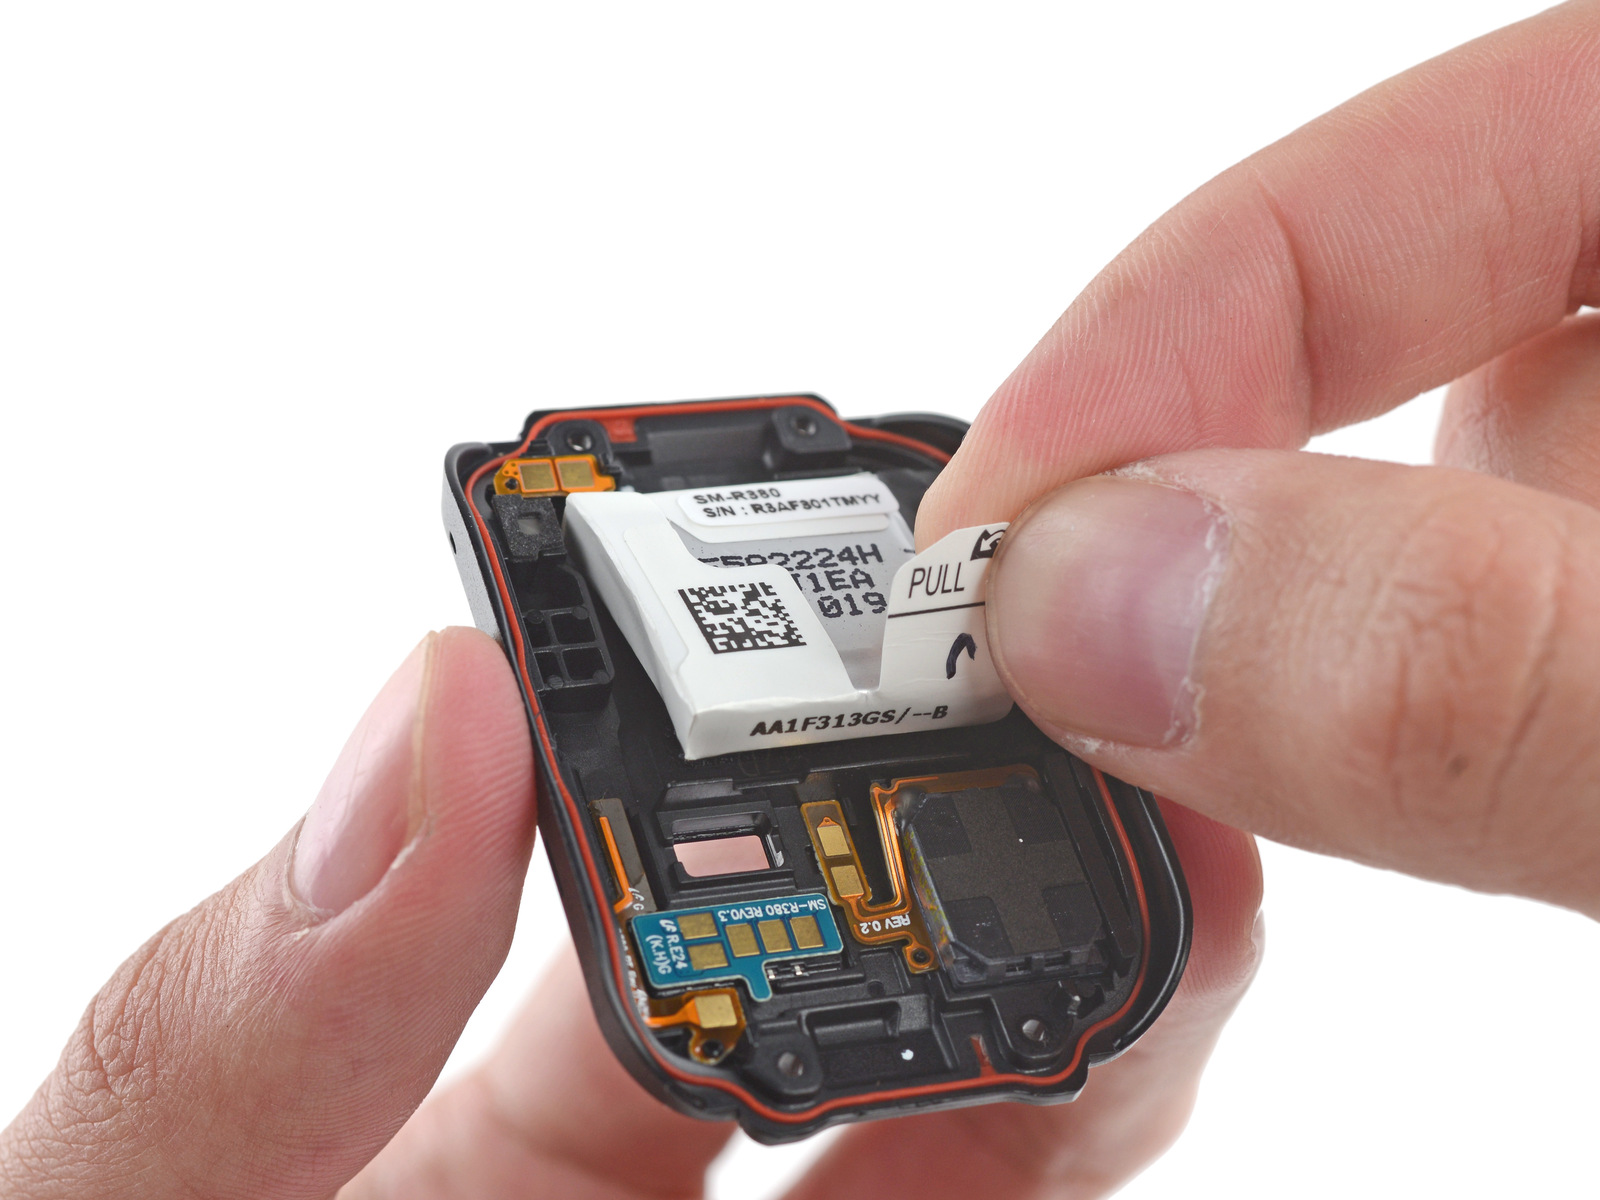 iFixit: Samsung's Gear is easy to take apart, has replaceable battery | Ars Technica